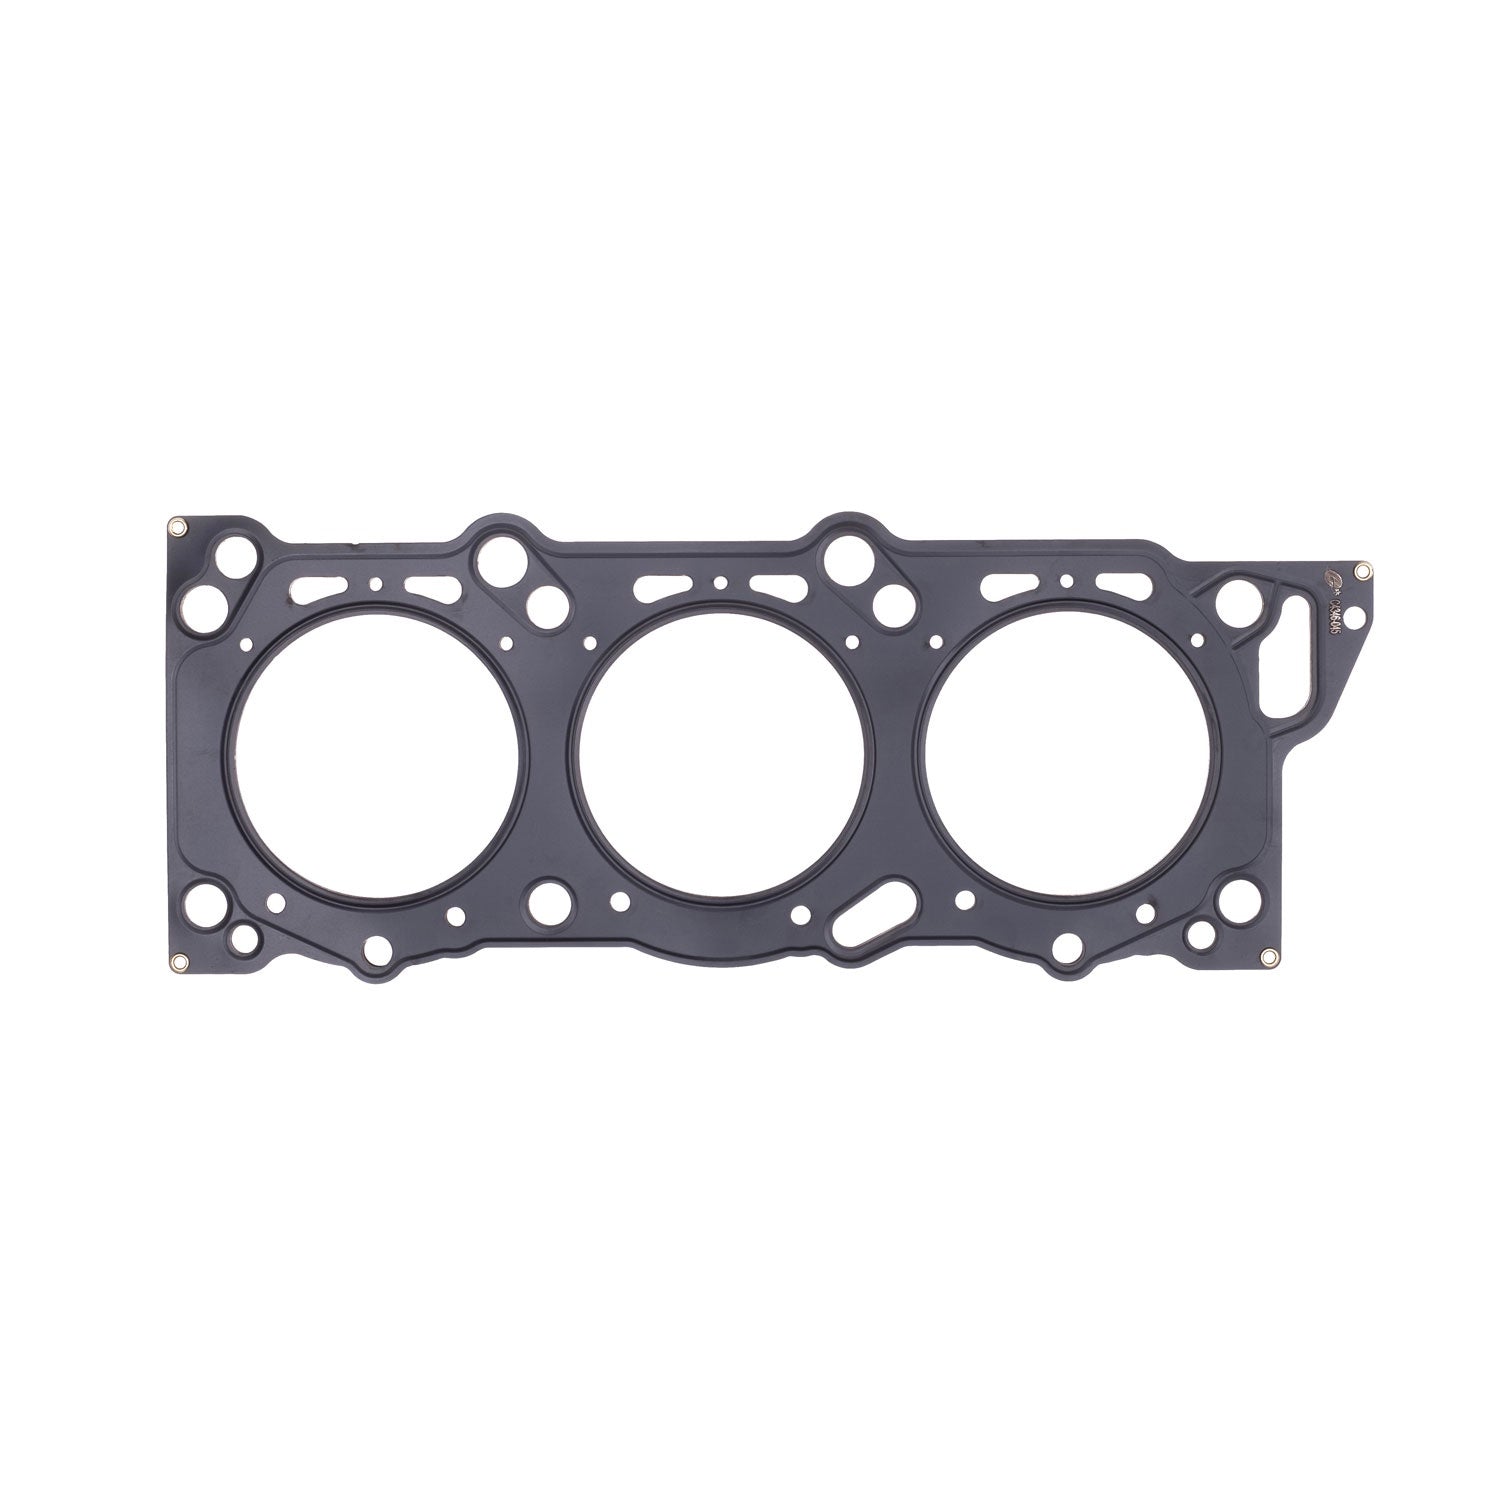 Cometic NISSAN VG30 Head Gasket 1.1mm Thick  88MM Bore - C4346-045